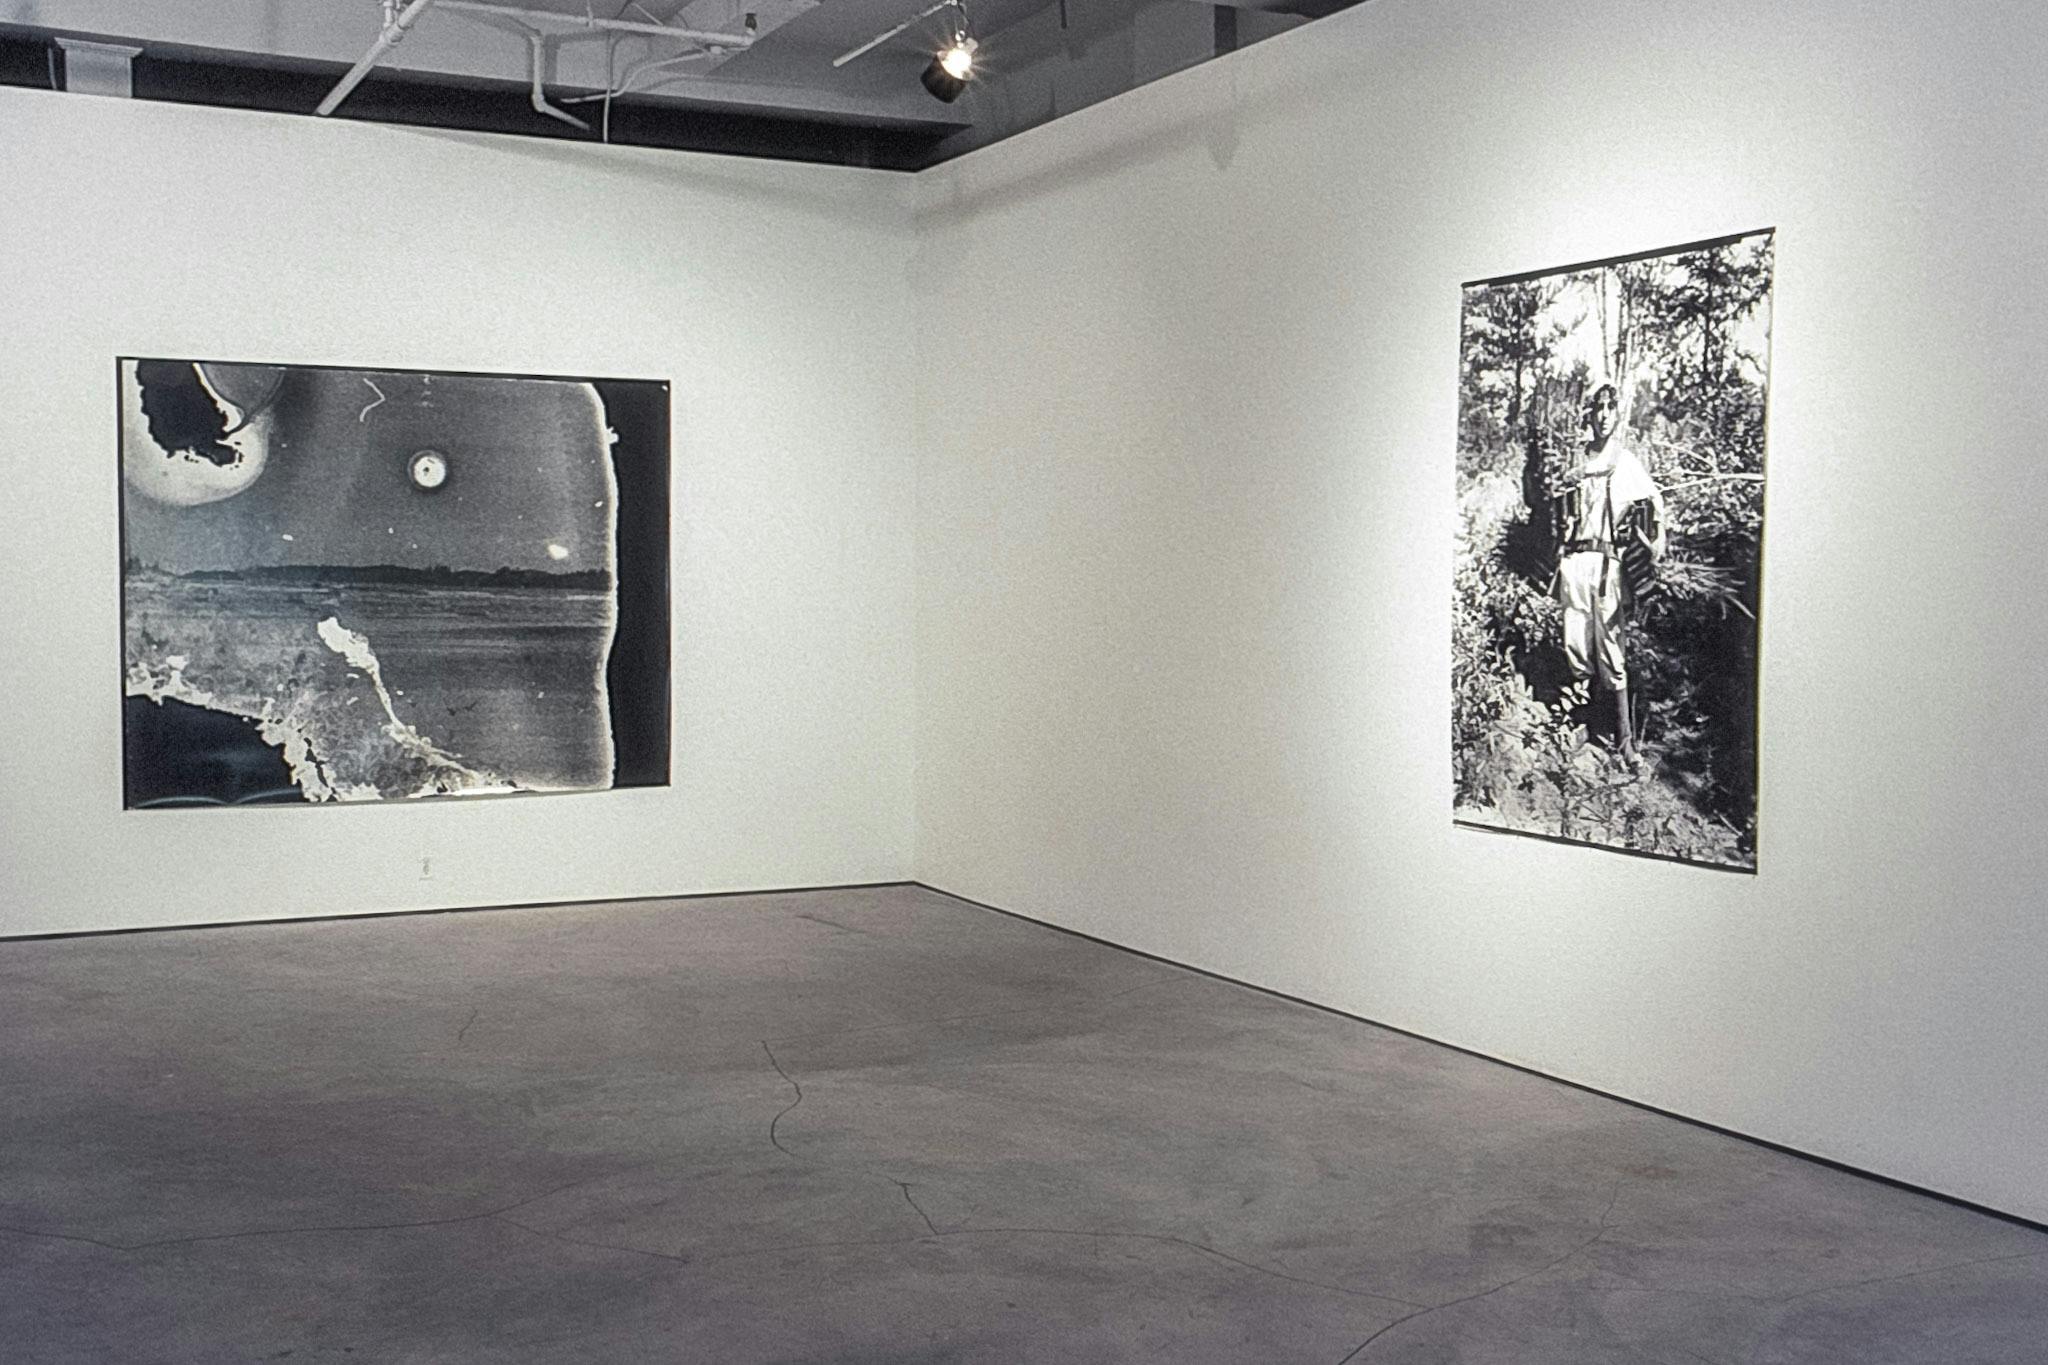 The corner of a gallery with 2 large black and white photos on the wall. The photo on the left shows a faint landscape on damaged film. The photo on the right shows a person standing in the woods.